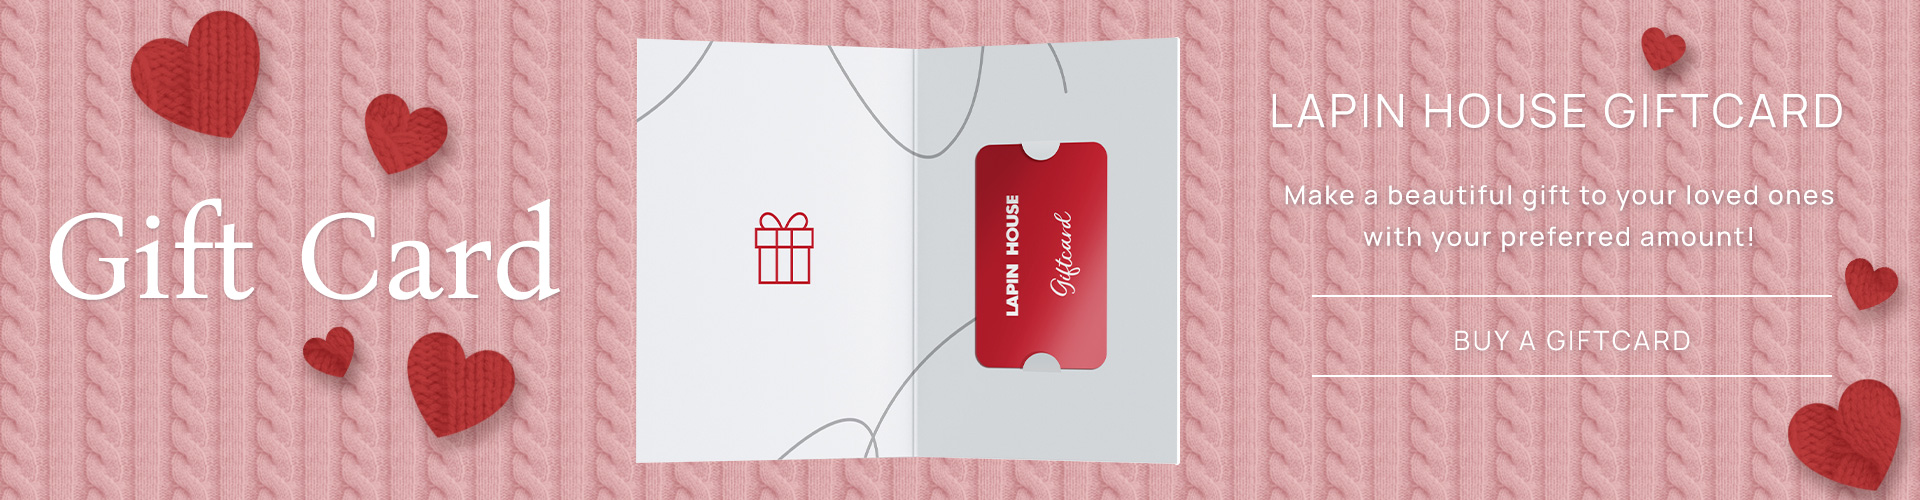 LapinKids - Category Banner - GiftCard